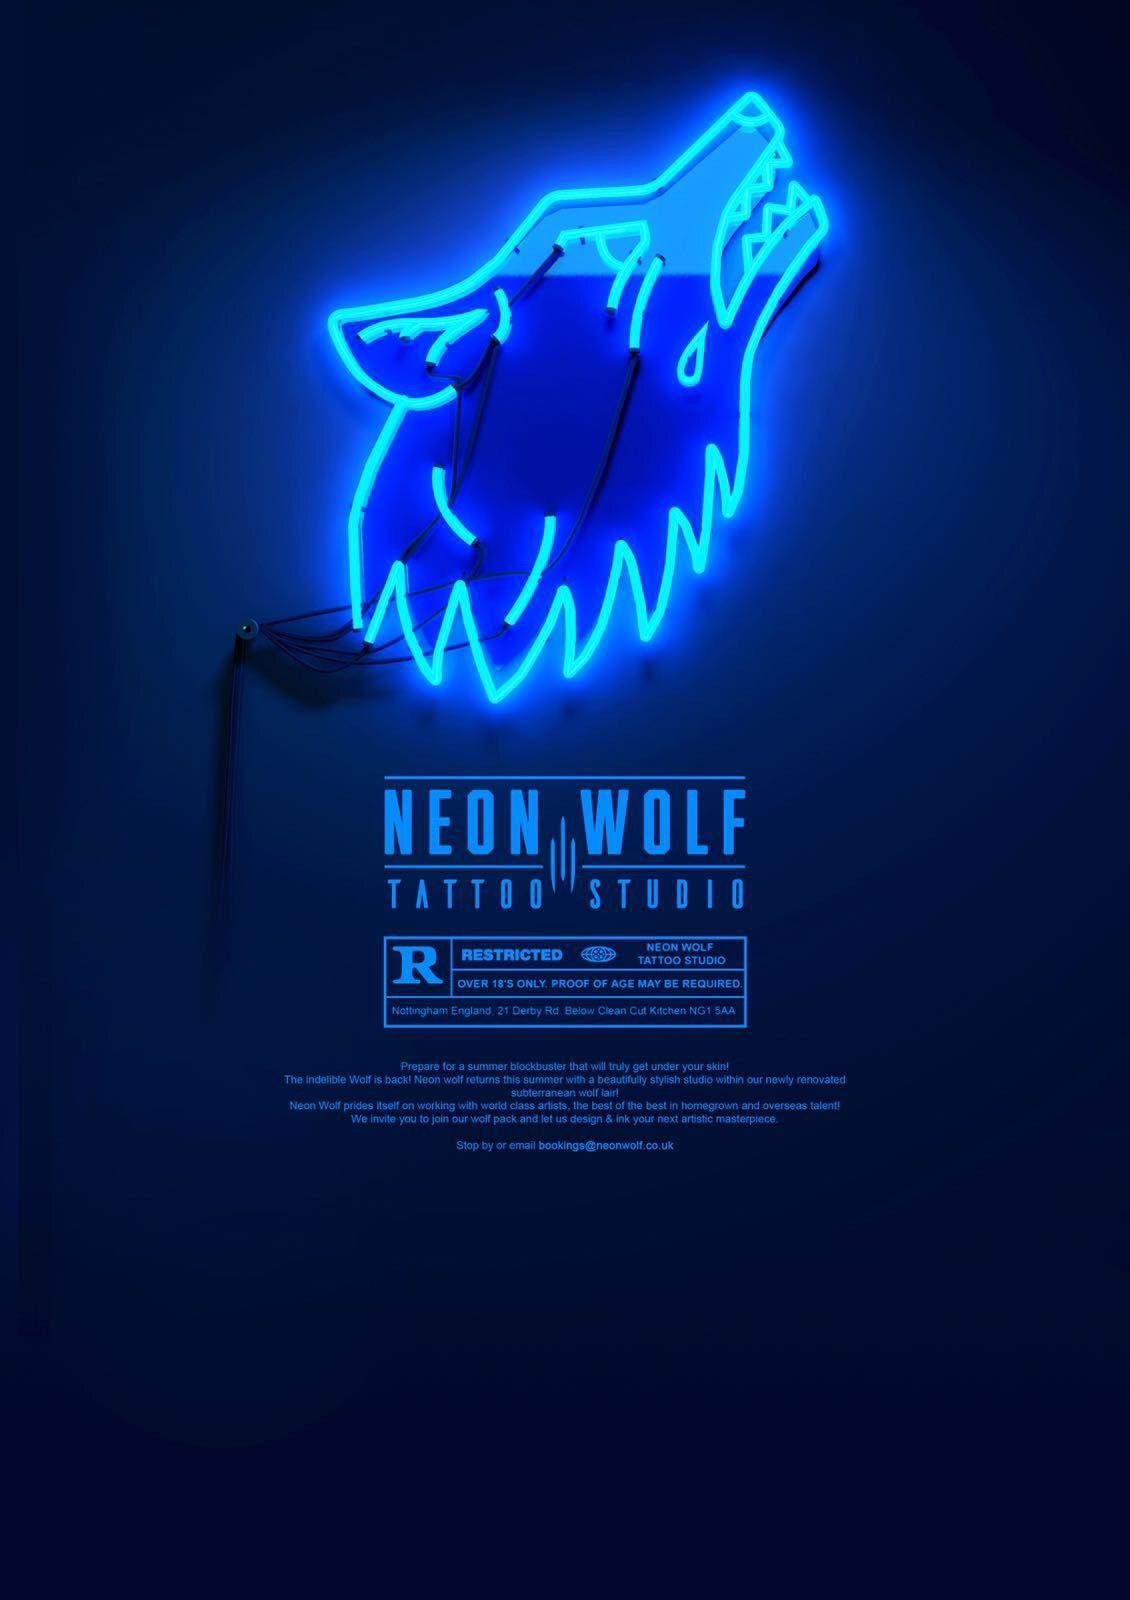 Neon Wolf Logo - Guest Artist Positions Available - Big Tattoo Planet Community Forum